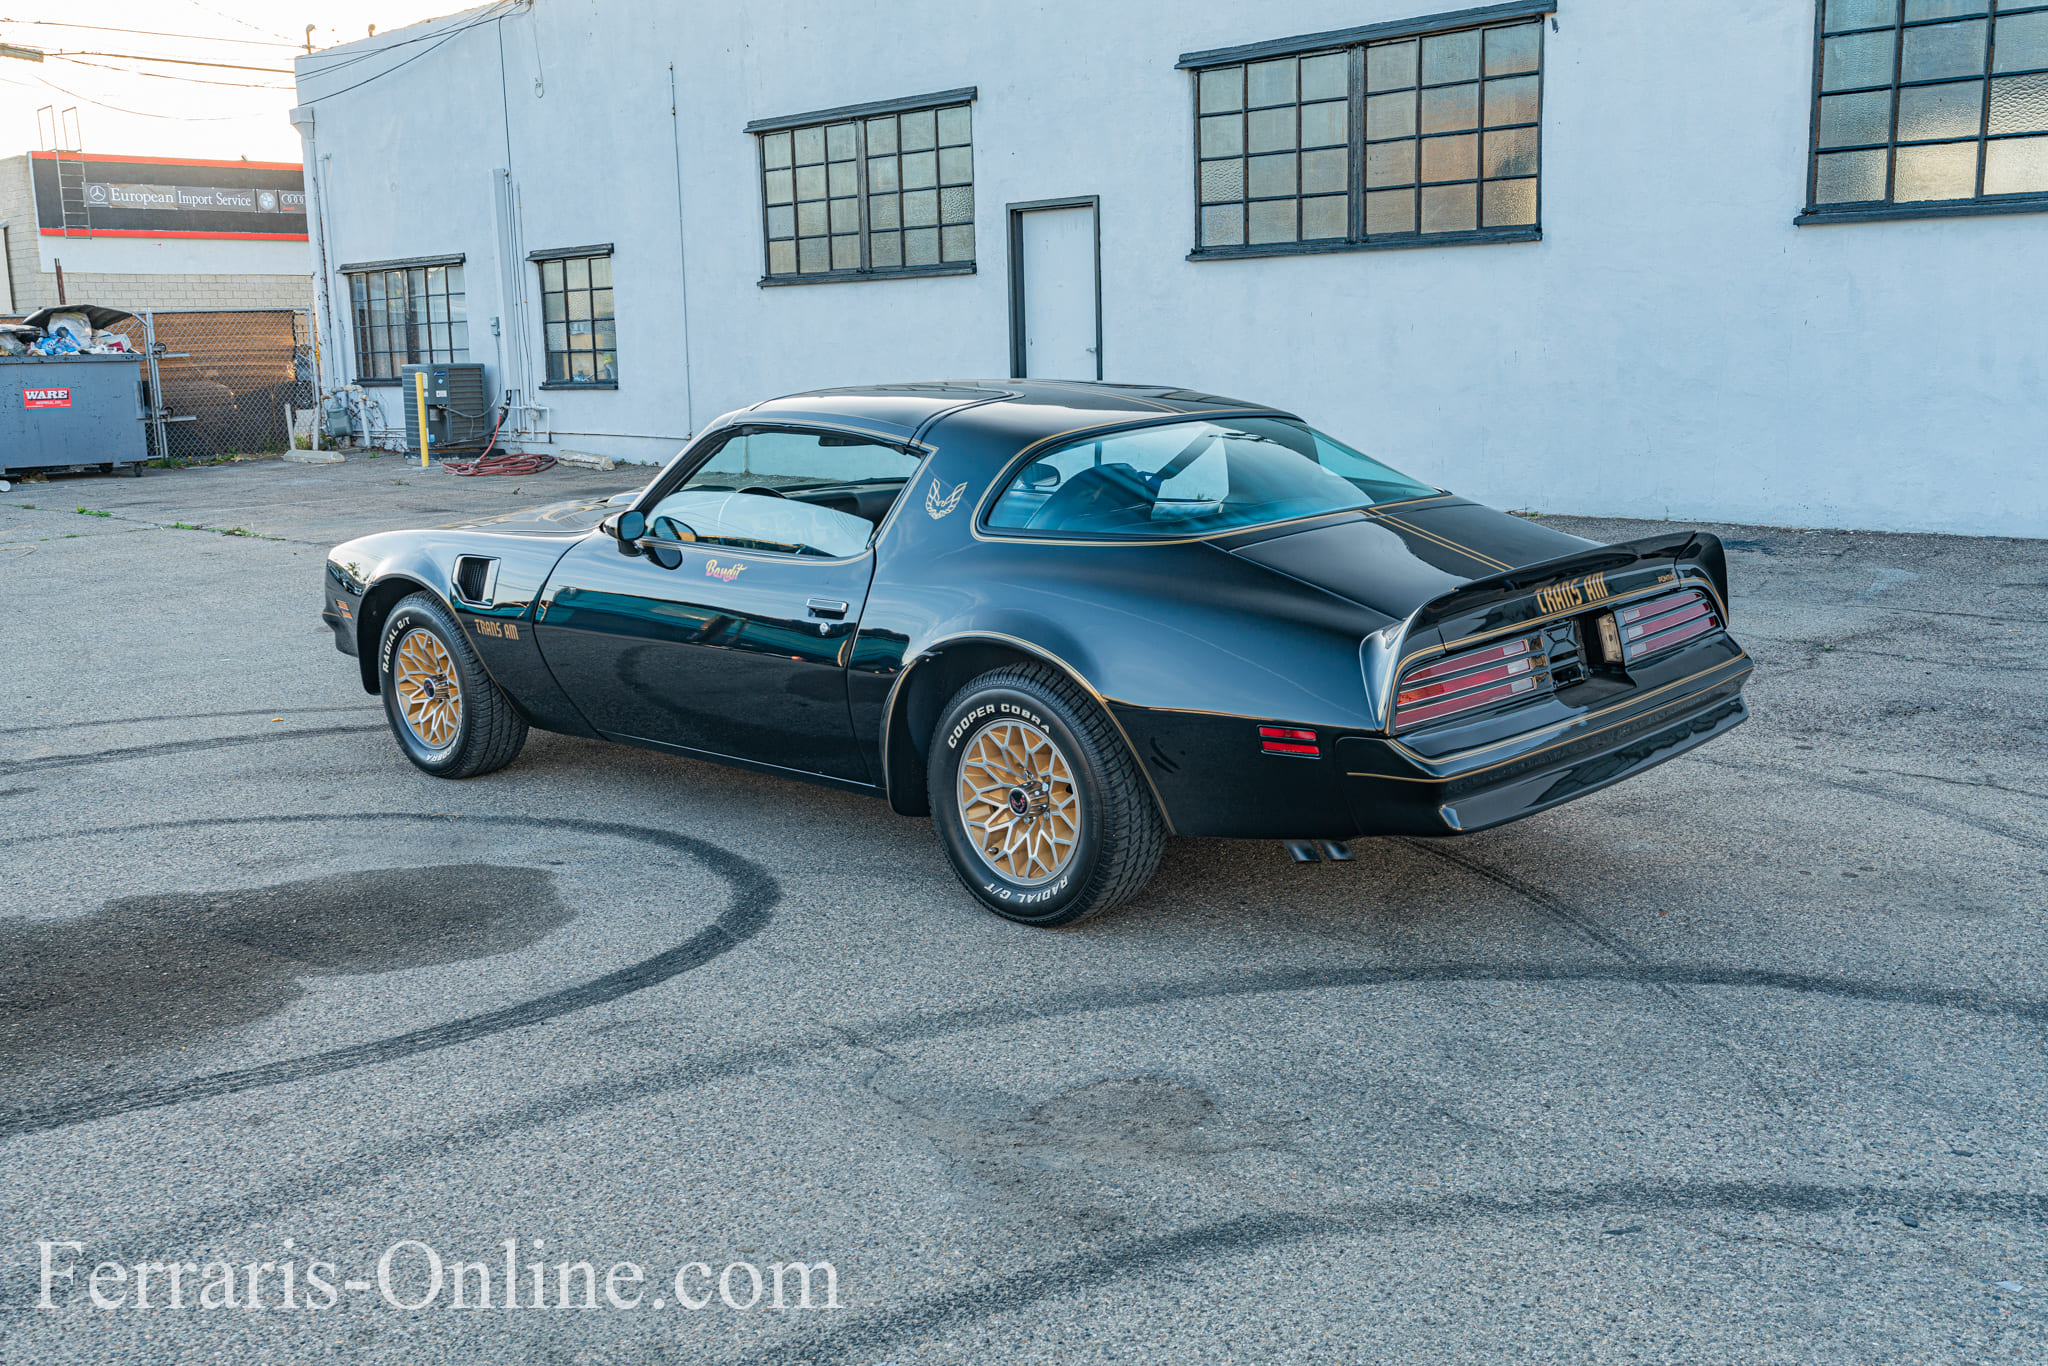 burt reynolds smokey and the bandit trans am for sale